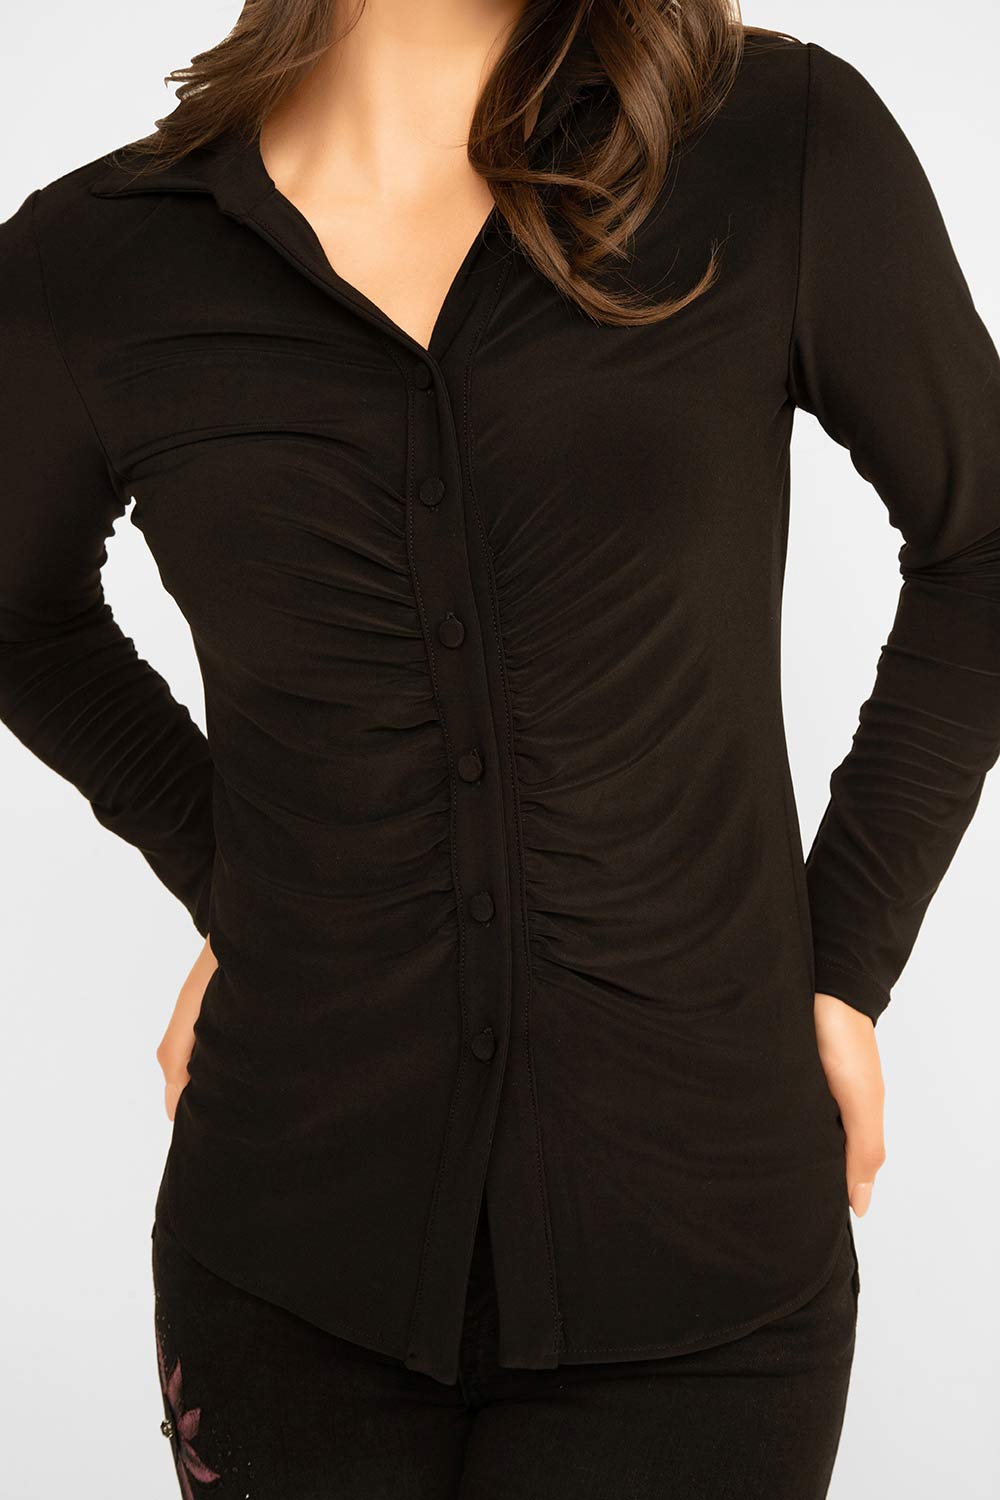 Women's Clothing FRANK LYMAN (233023) Ruched Button Up Shirt in BLACK